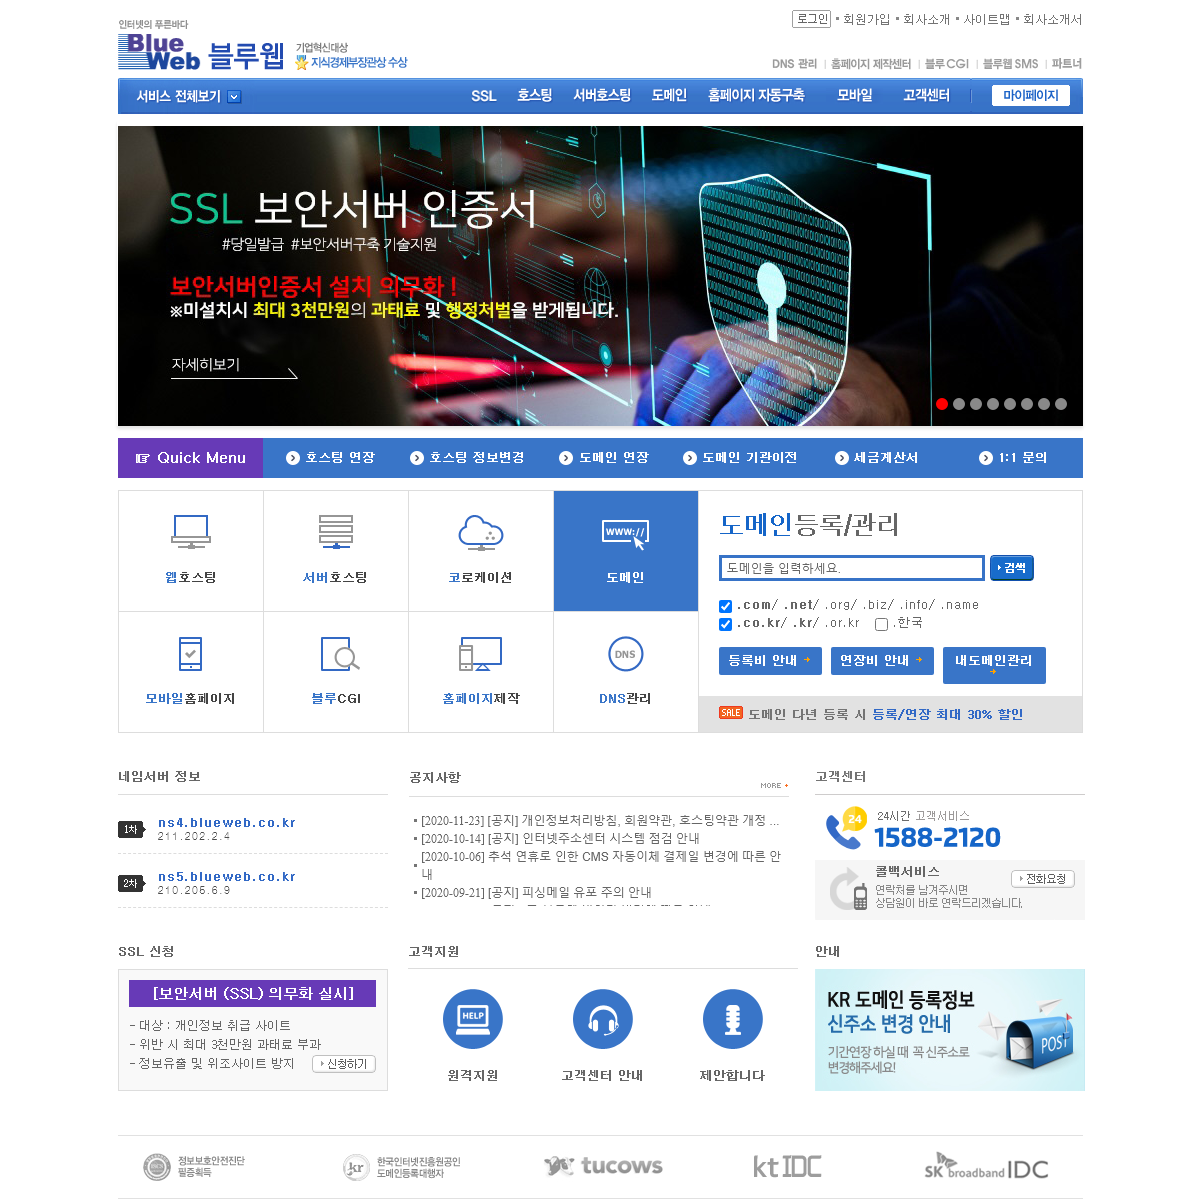 A complete backup of blueweb.co.kr